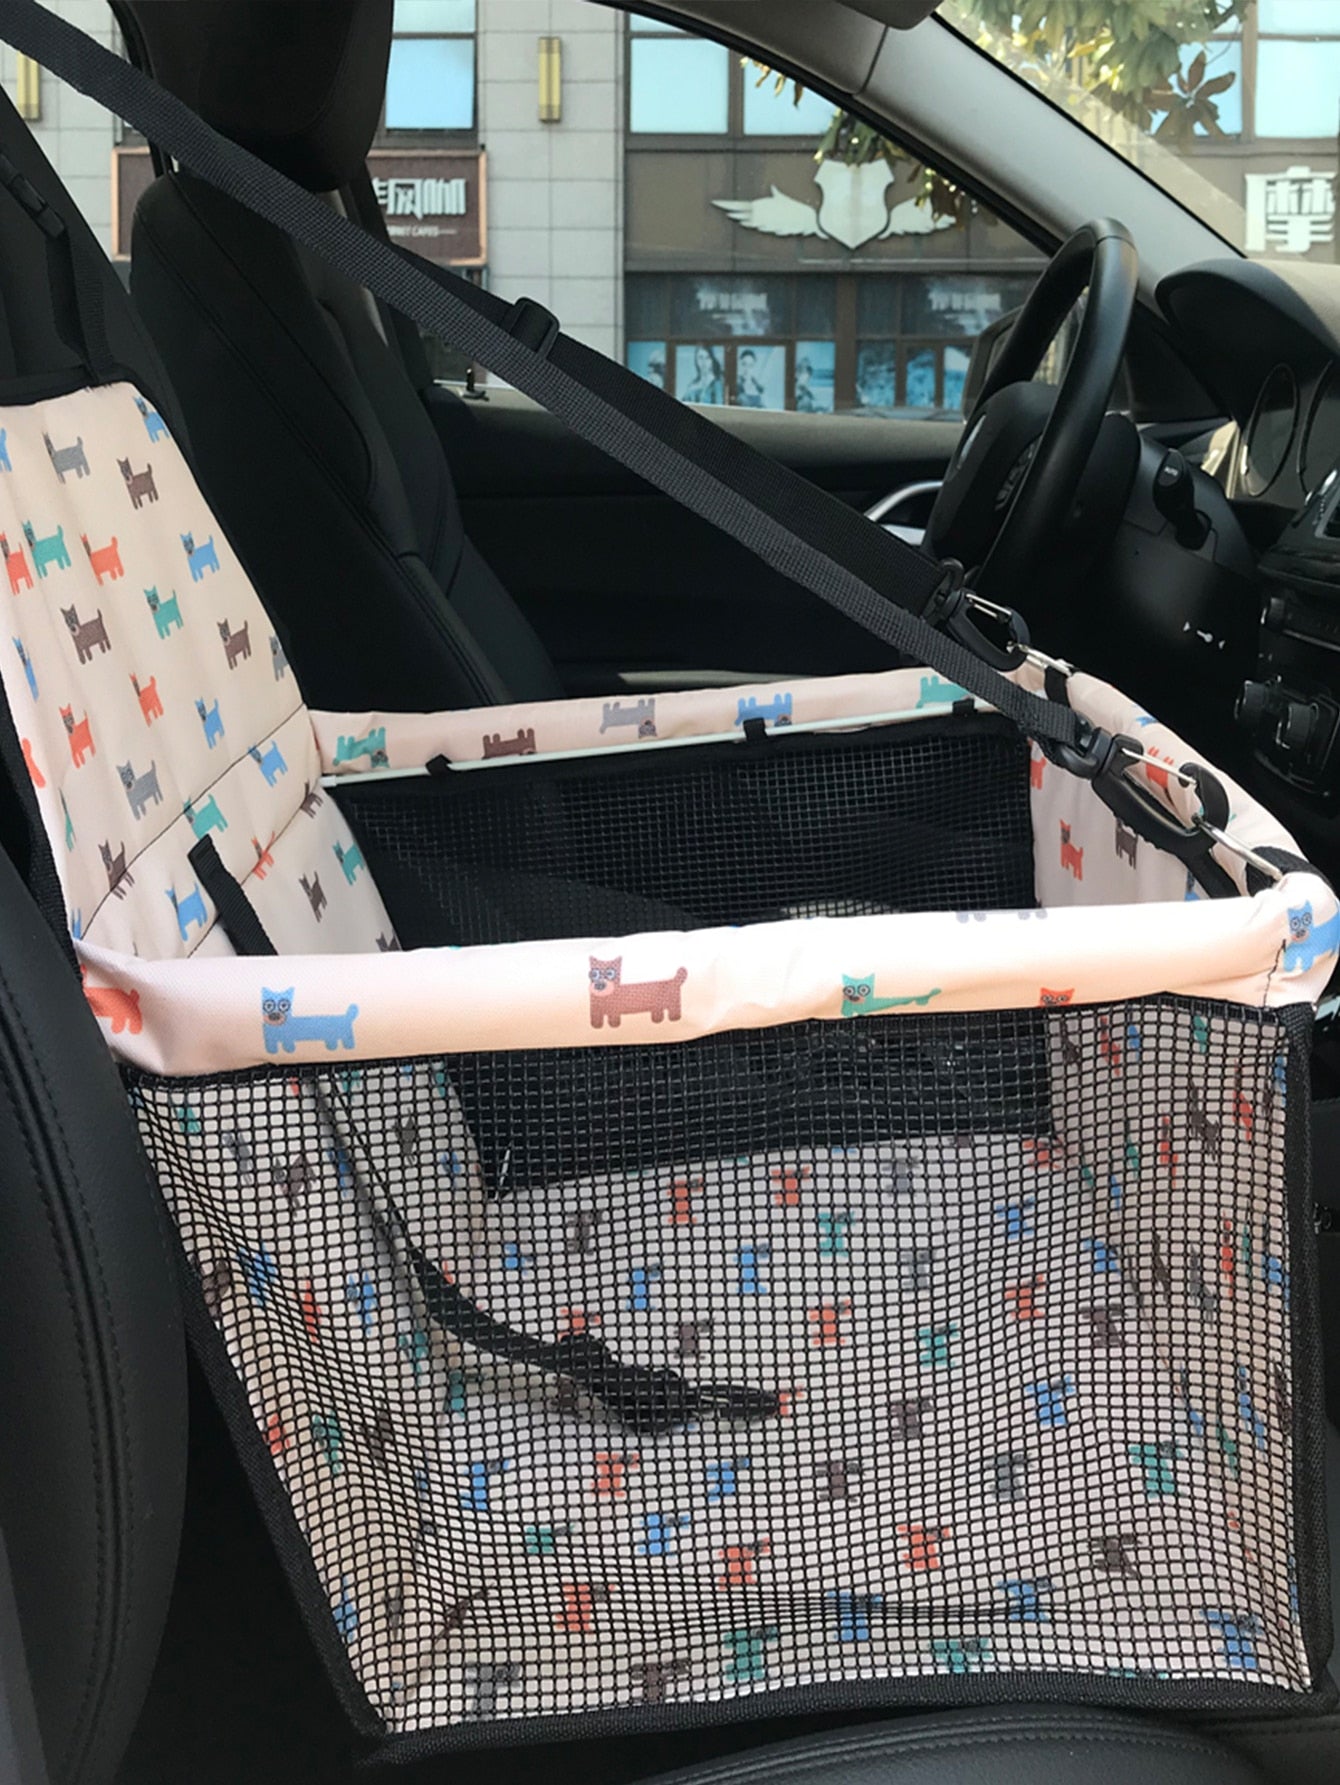 Dog Seat For Car